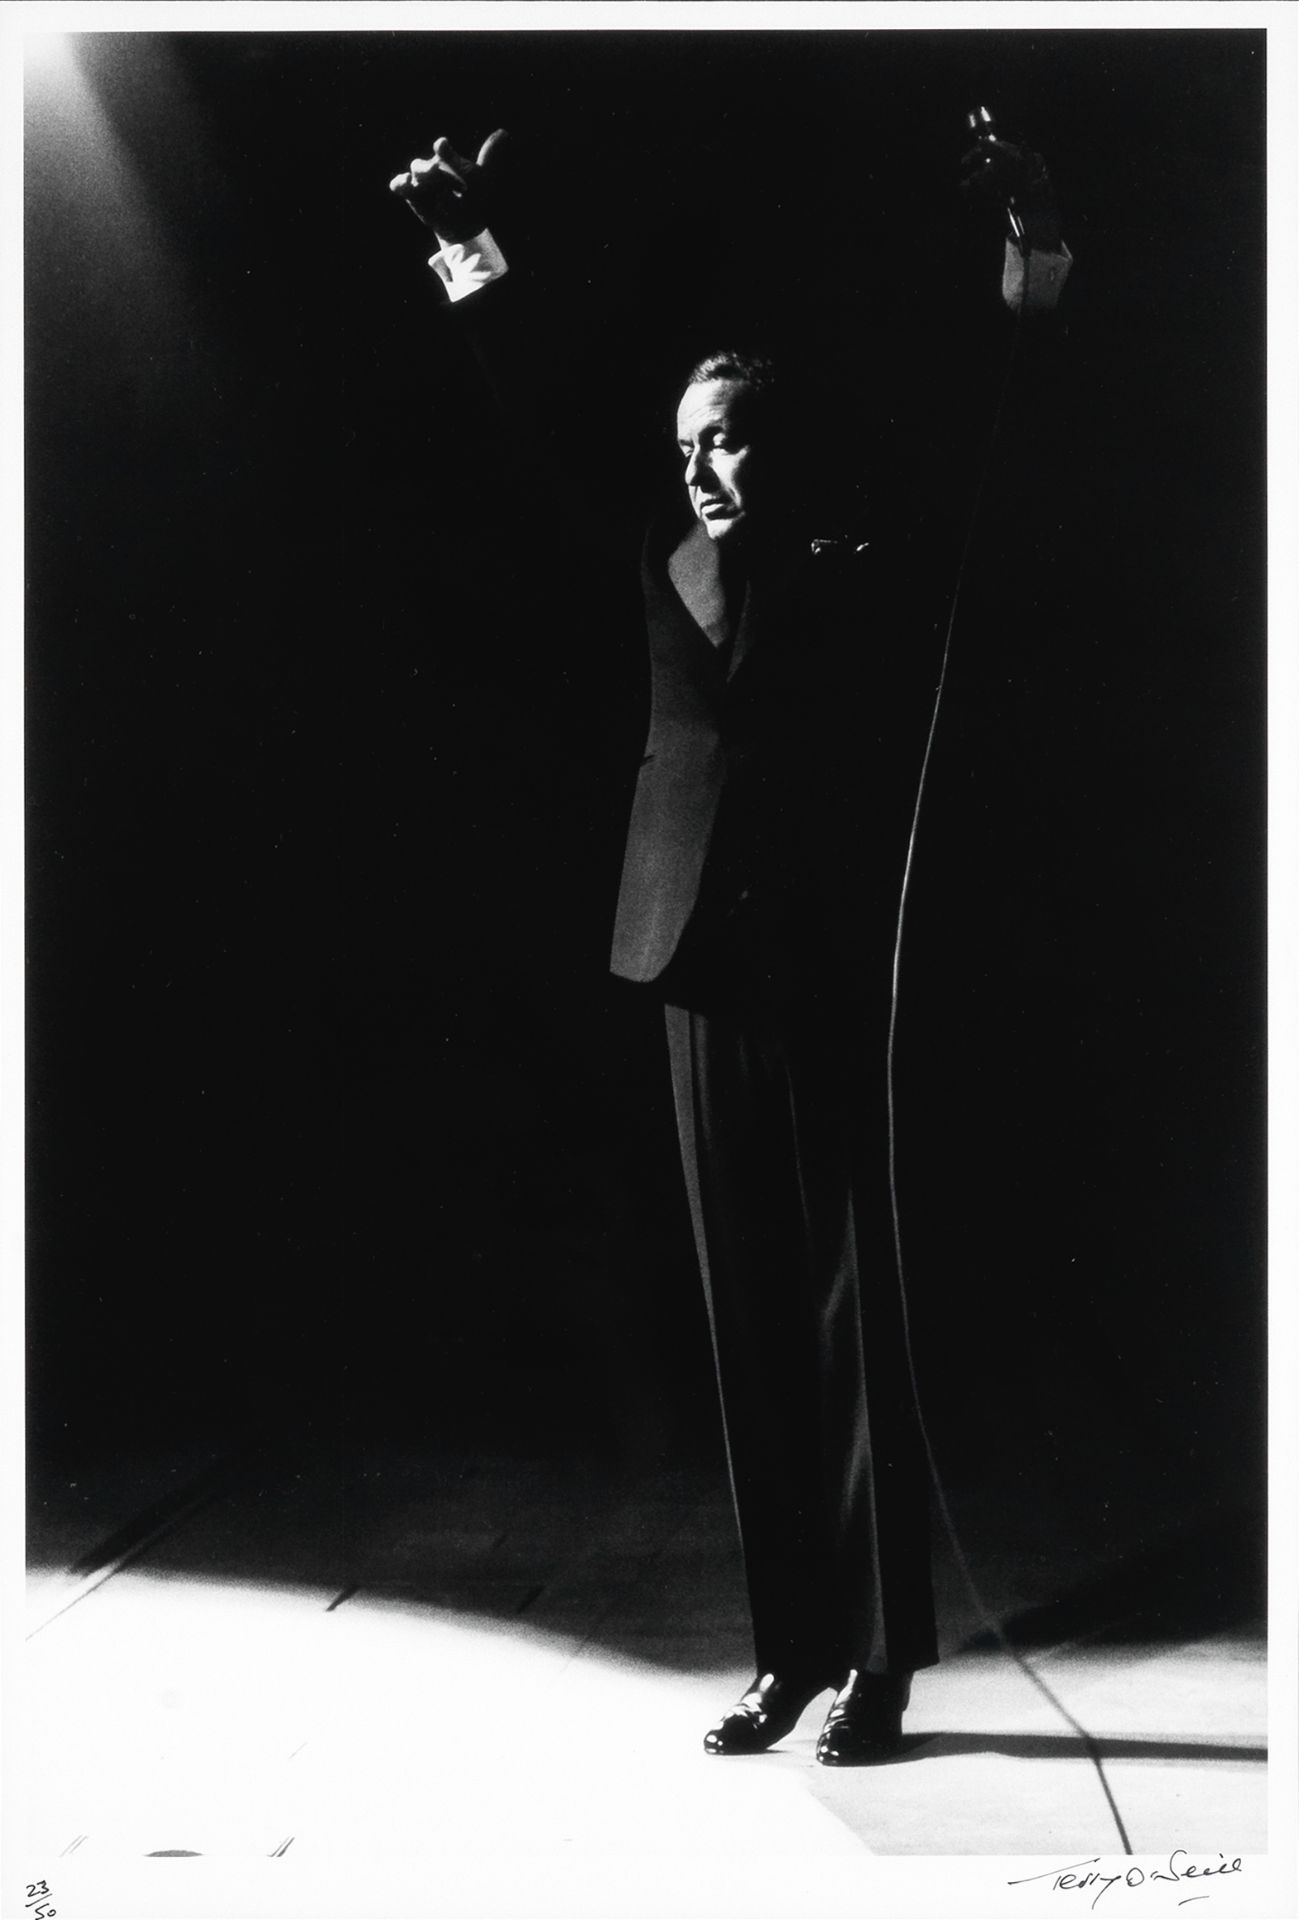 Terry O'Neill (British, 1938-2019): Frank Sinatra on Stage, London, 1989, printed later